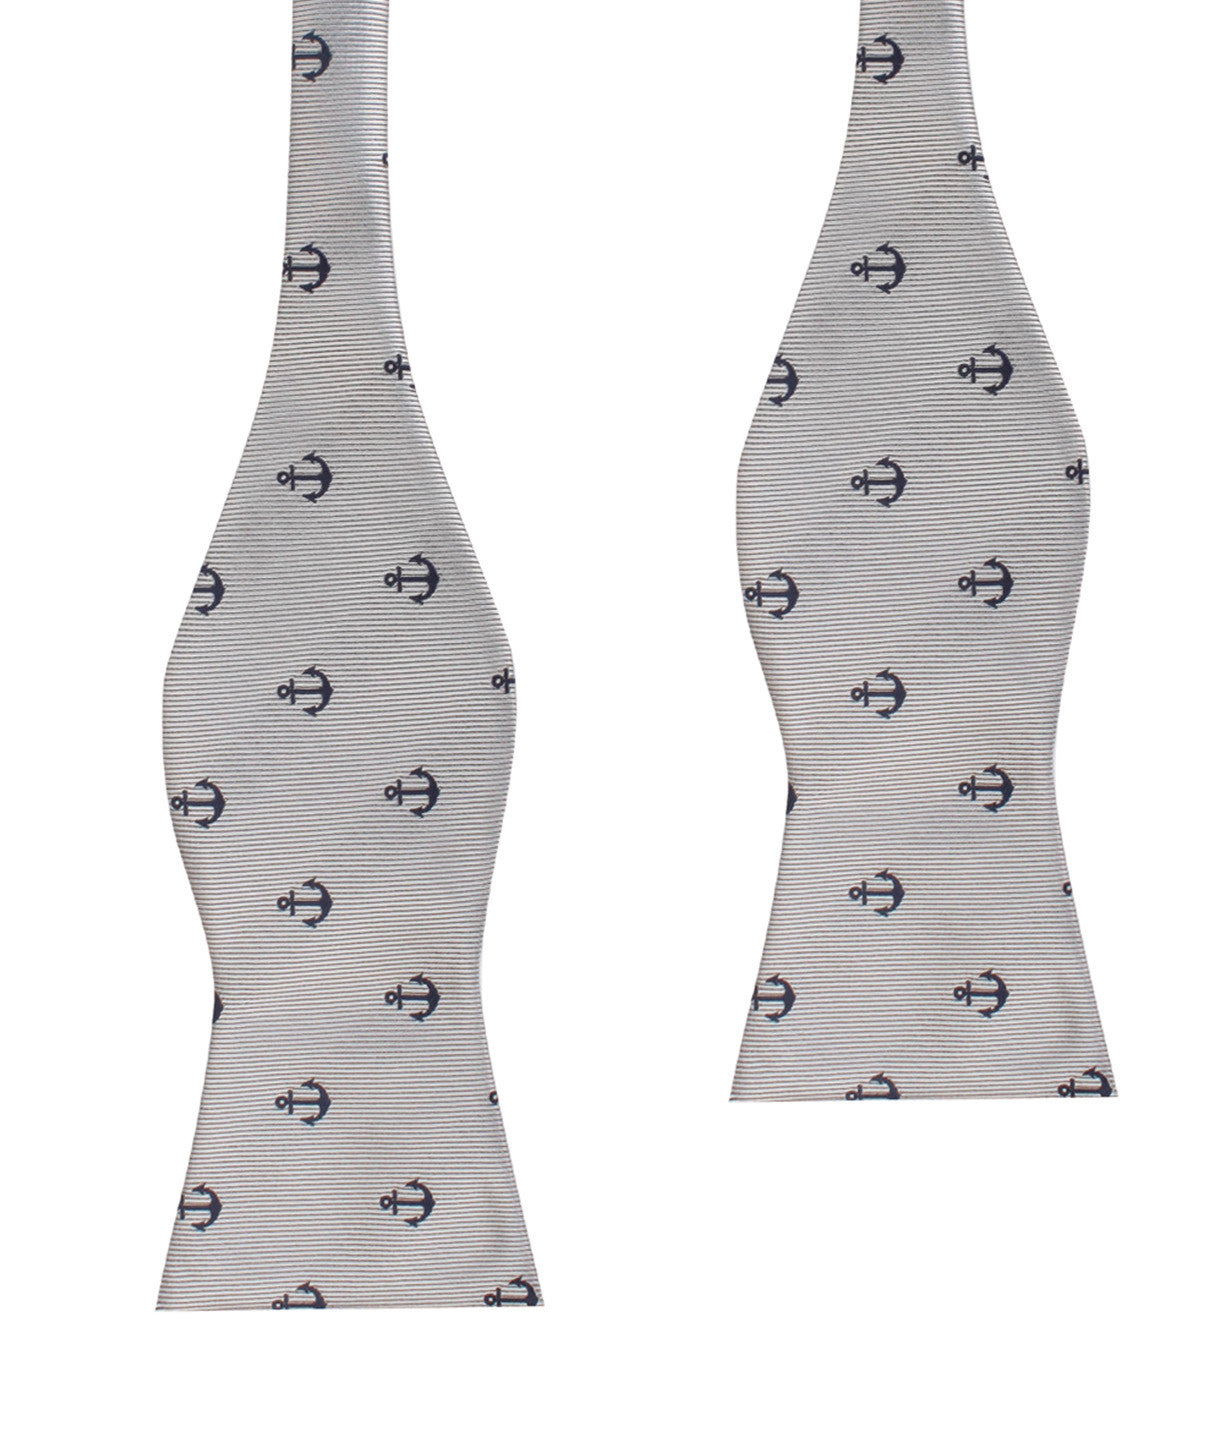 The OTAA Light Grey with Navy Blue Anchors Self Tie Bow Tie